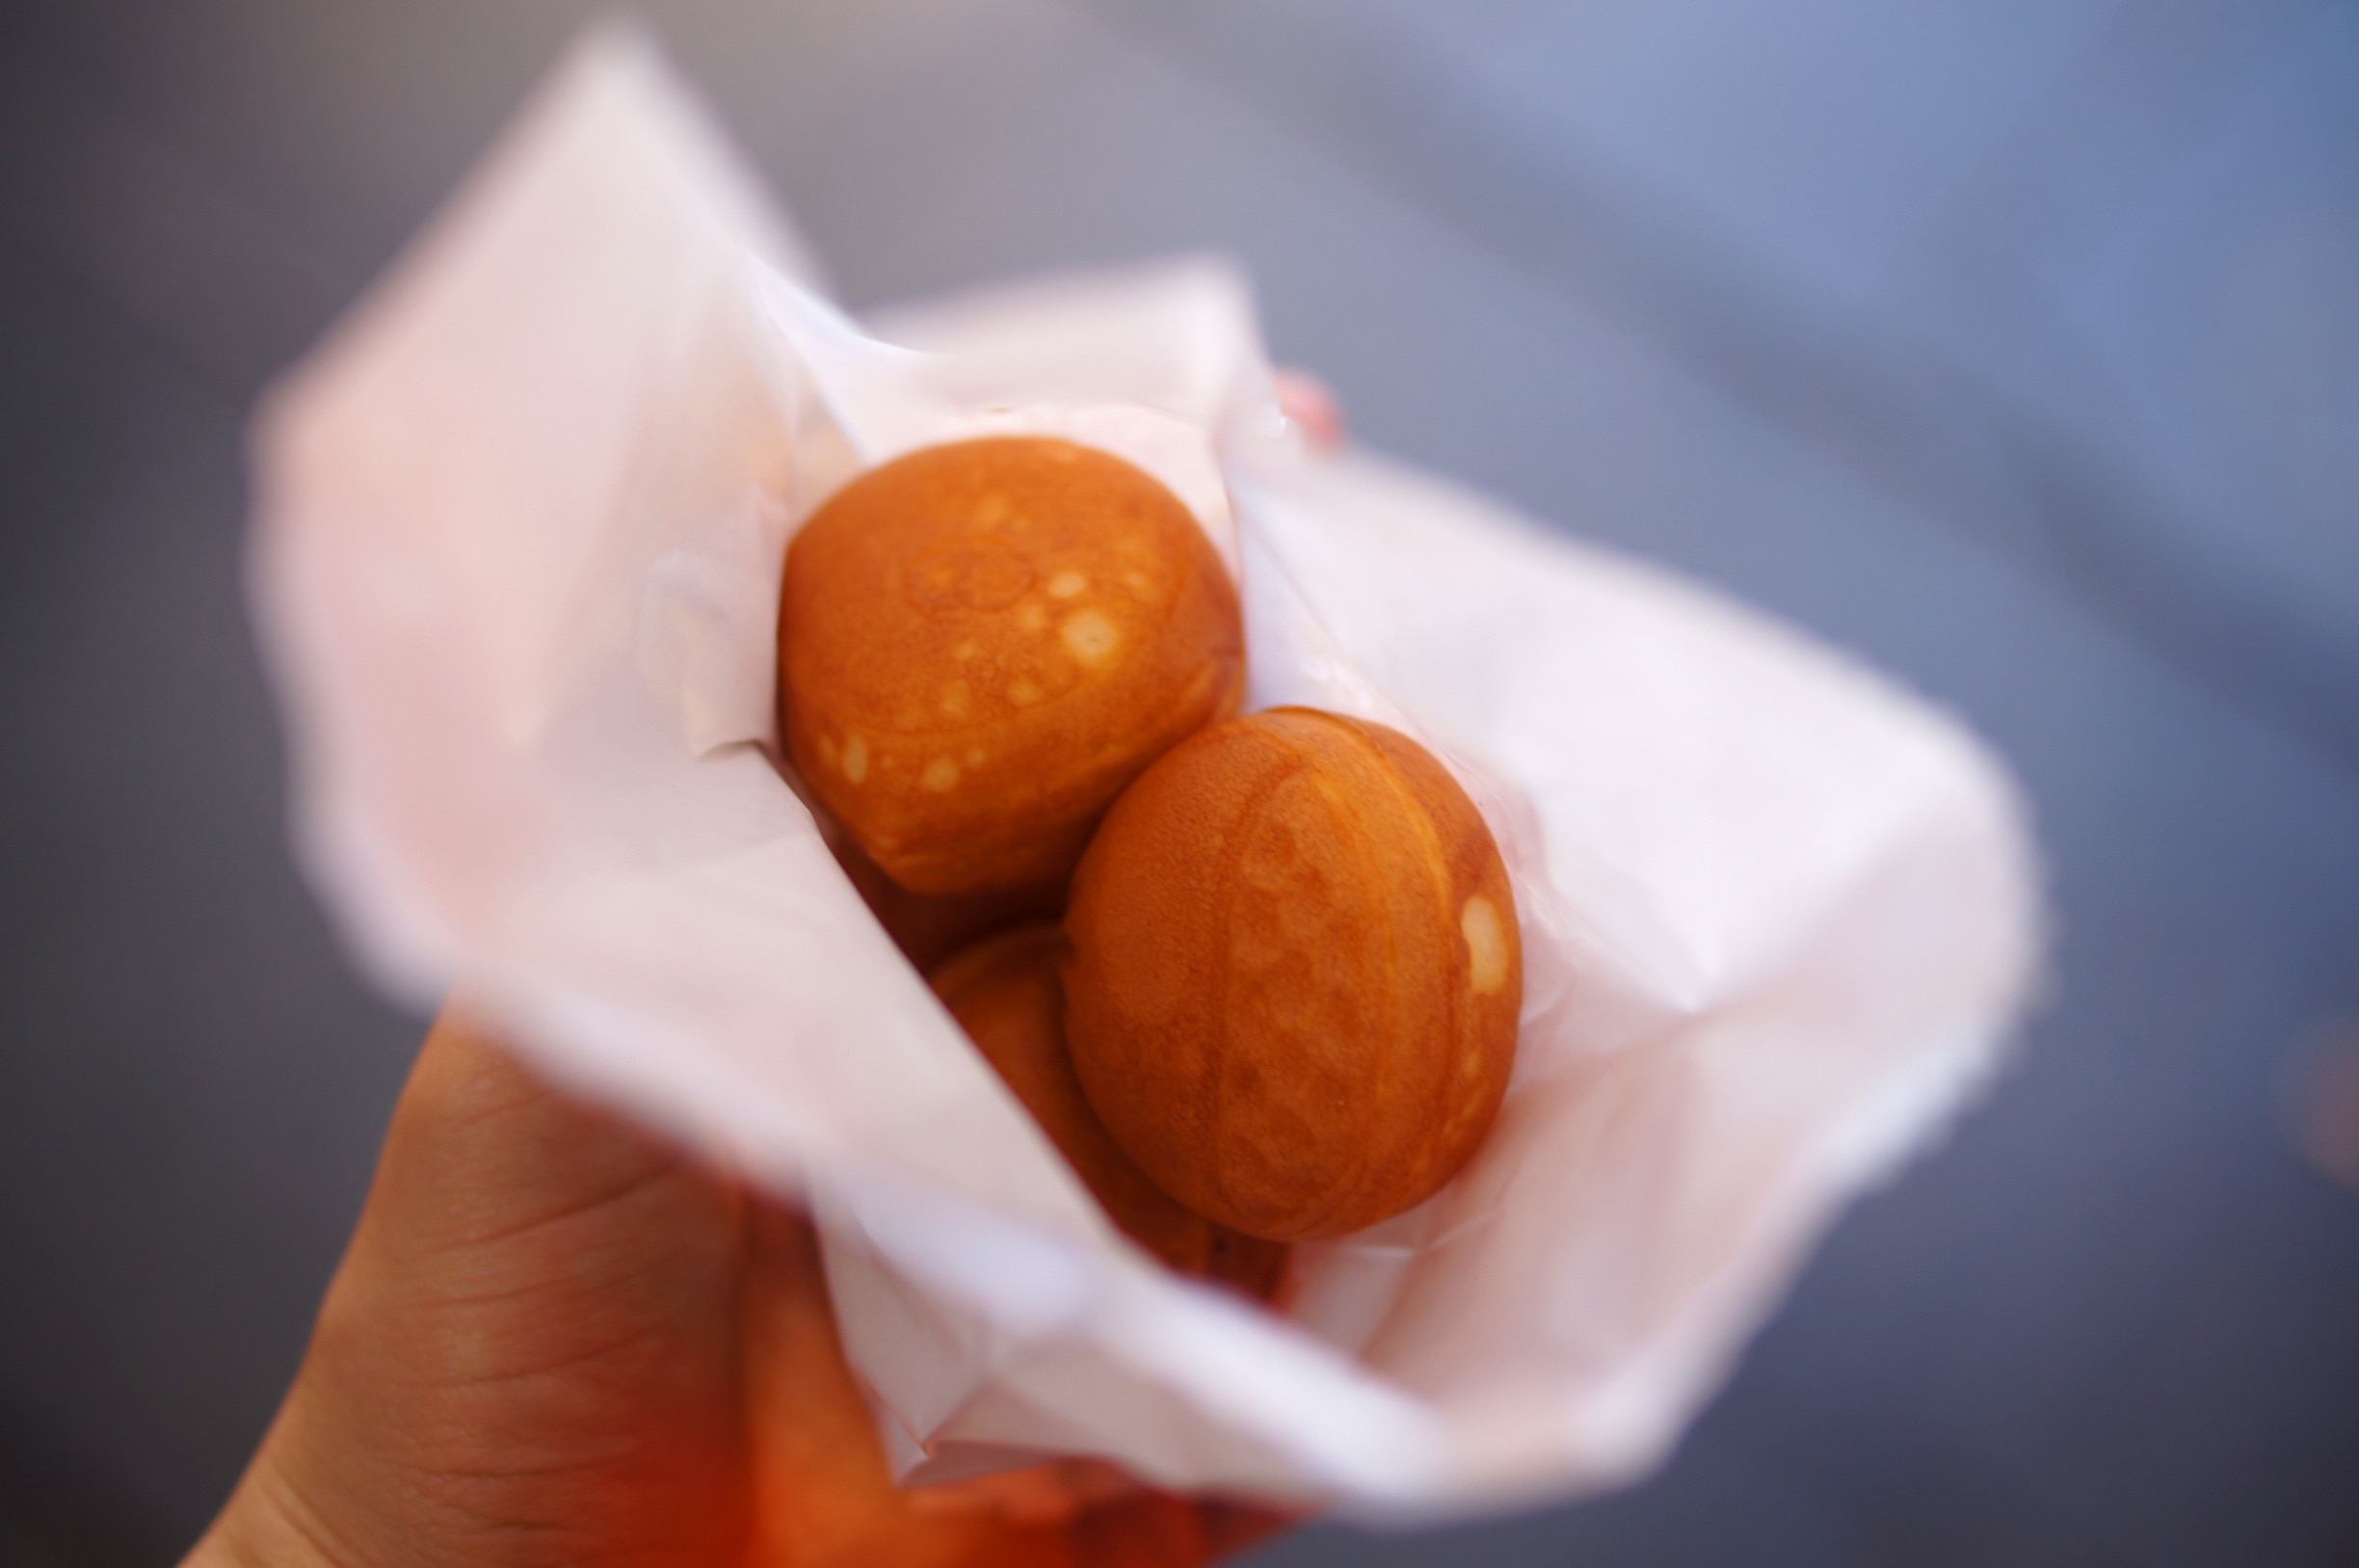 Another discovery at the Chinatown Nightmarkets. These little sweets are called emperor's cream puffs. A tiny little warm cake bite, filled with glorious custard. 
They are freshly made at Emperor's Garden Cake and Bakery, 75 Dixon Street, Sydney.

#FoodieFinds